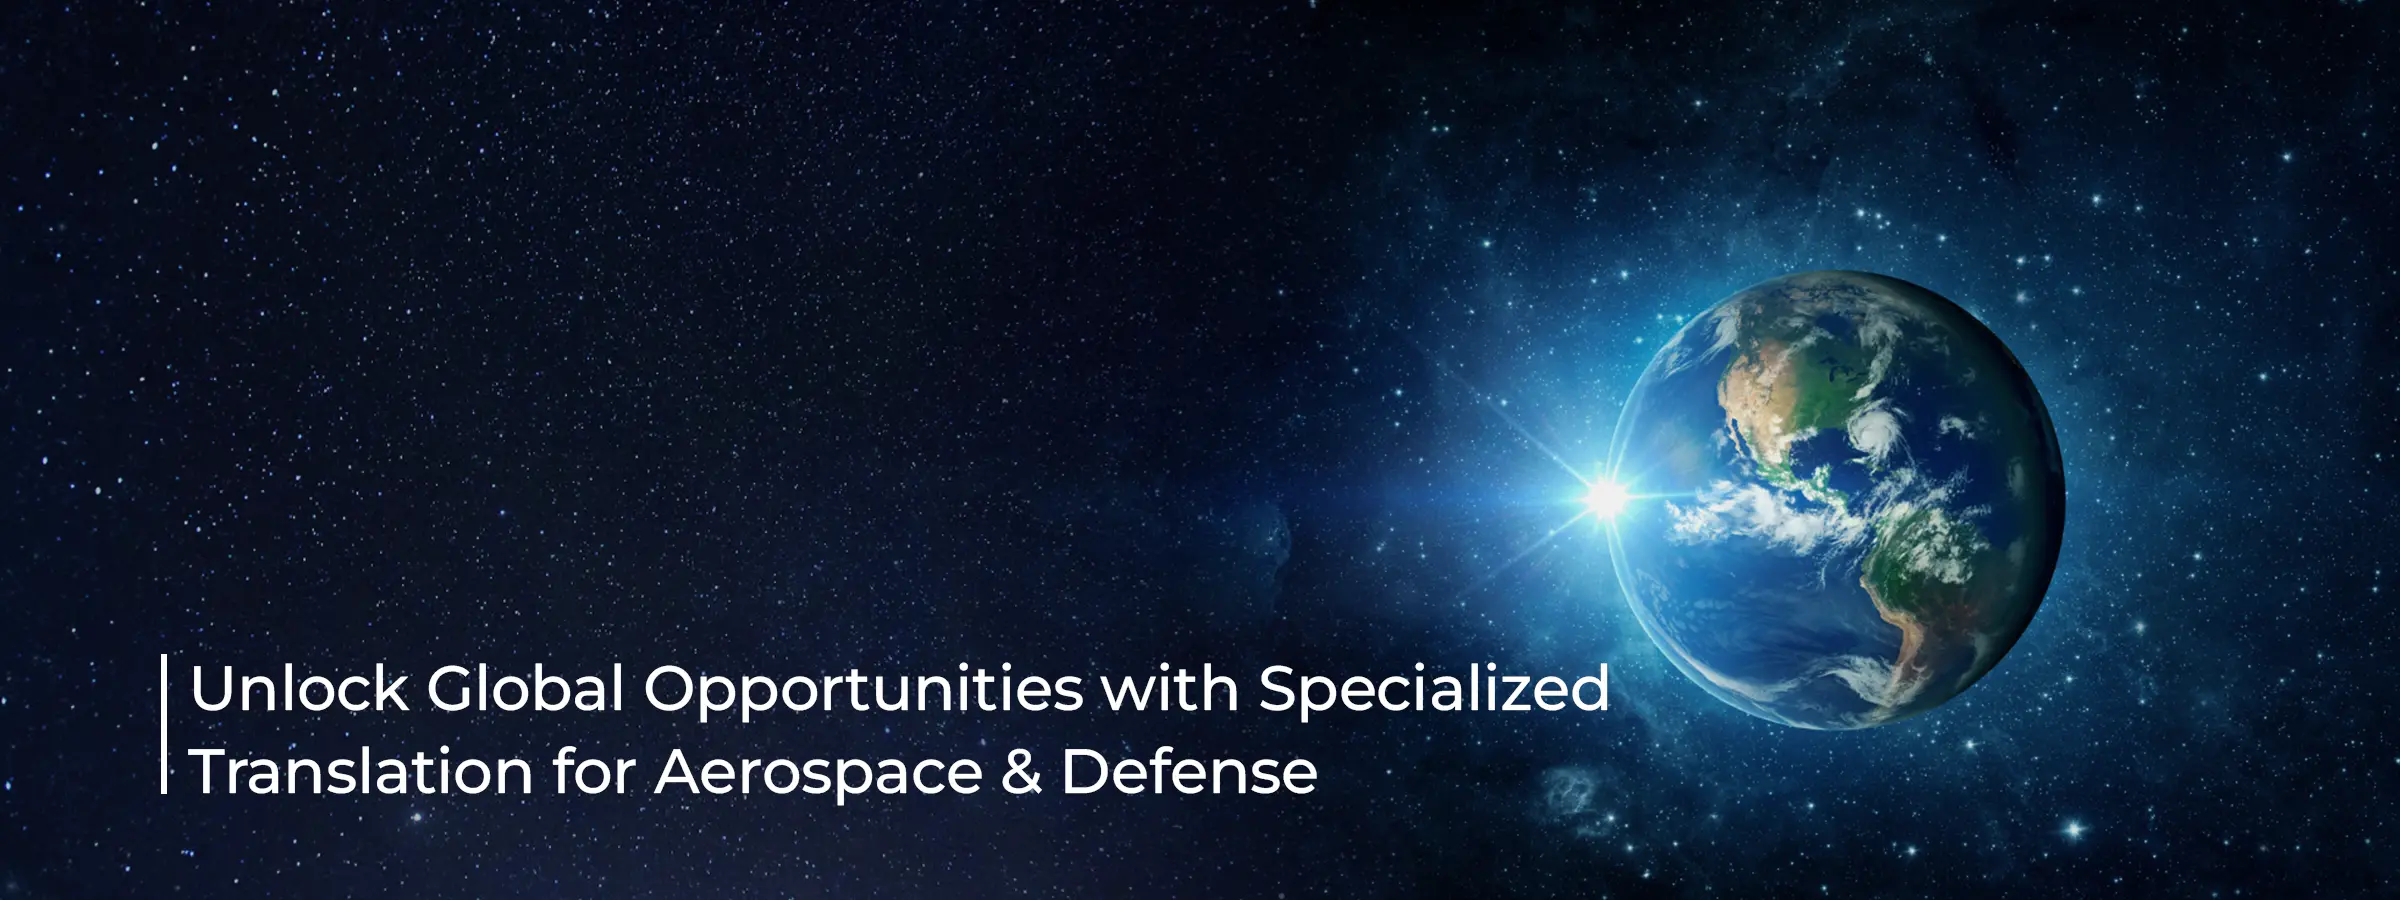 unlock-global-opportunities-with-specialized-translation-for-aerospace-and-defense